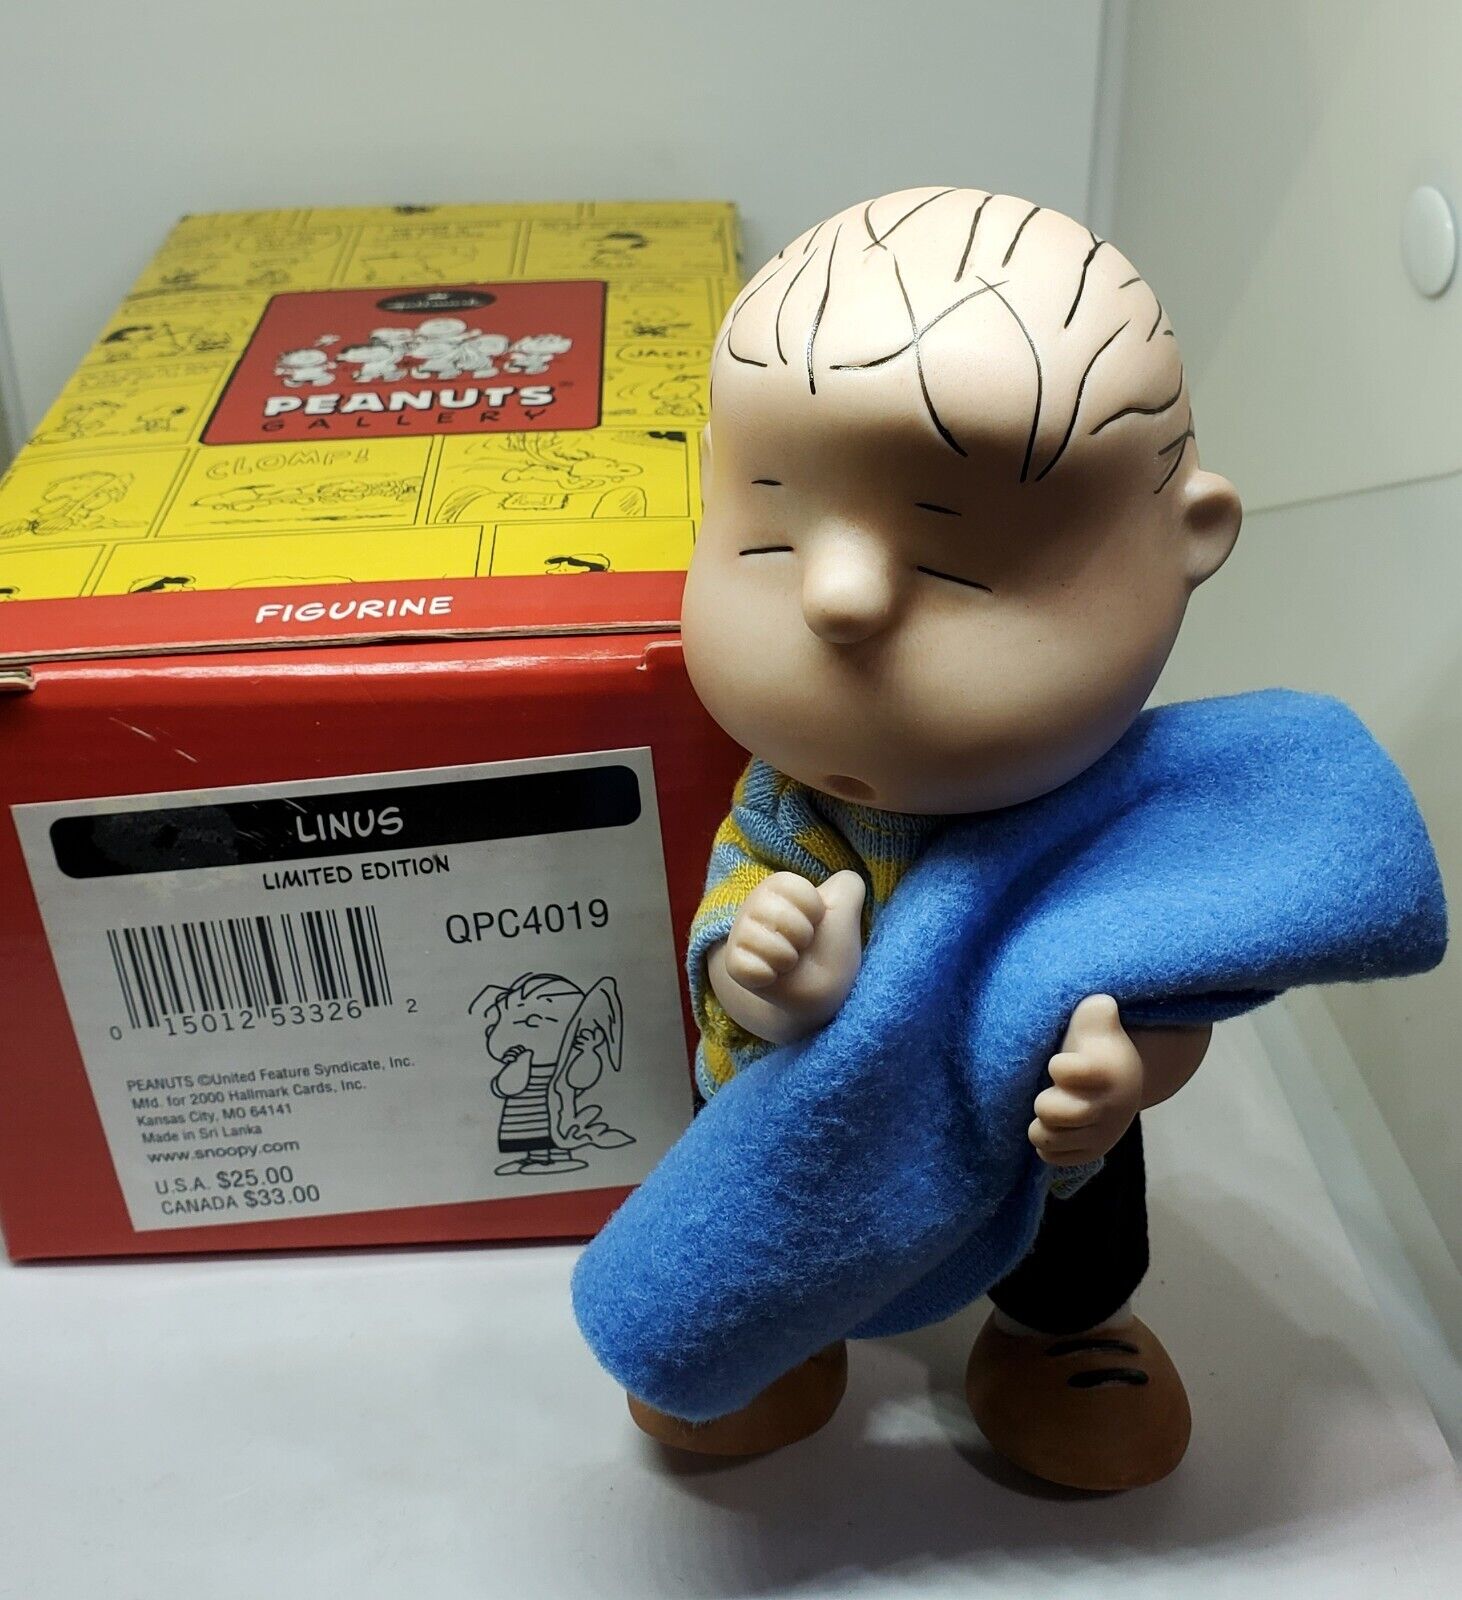 Hallmark Peanuts Gallery *6 inch Porcelain Jointed LINUS Figurine Boxed